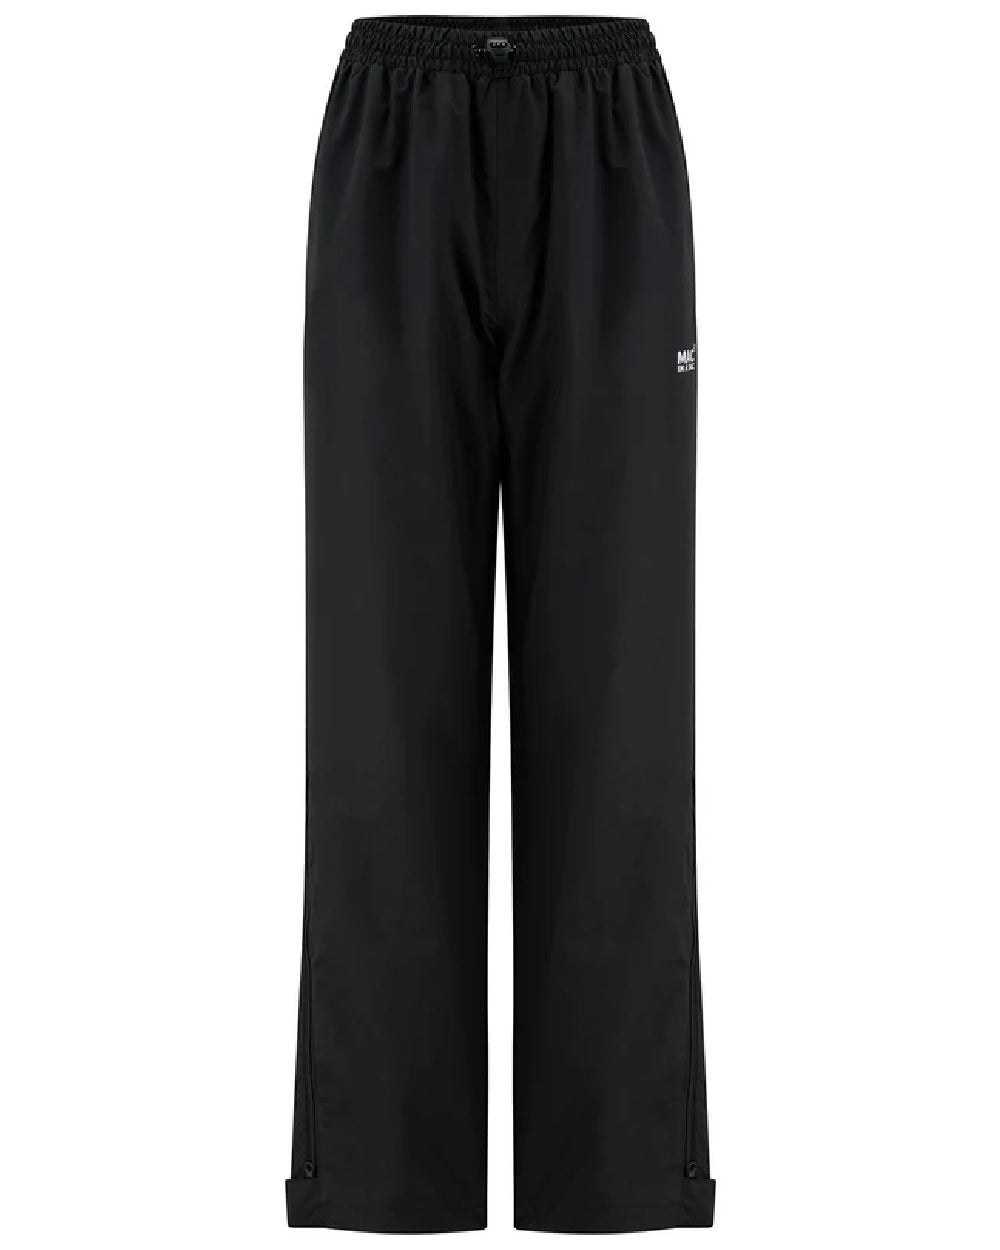 Liquorice coloured Mac In A Sac Voyager Womens Waterproof Overtrousers on white background 